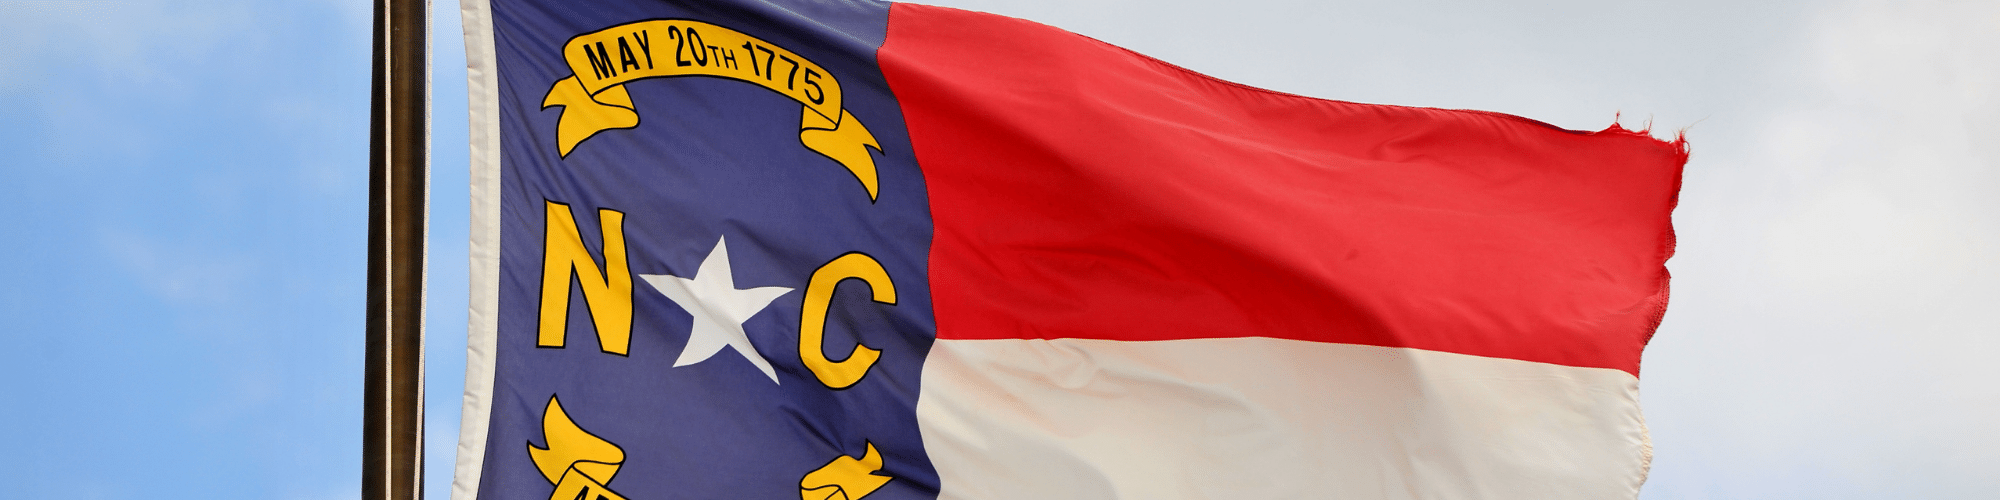 North Carolina one of the best states to live - NC State Flag